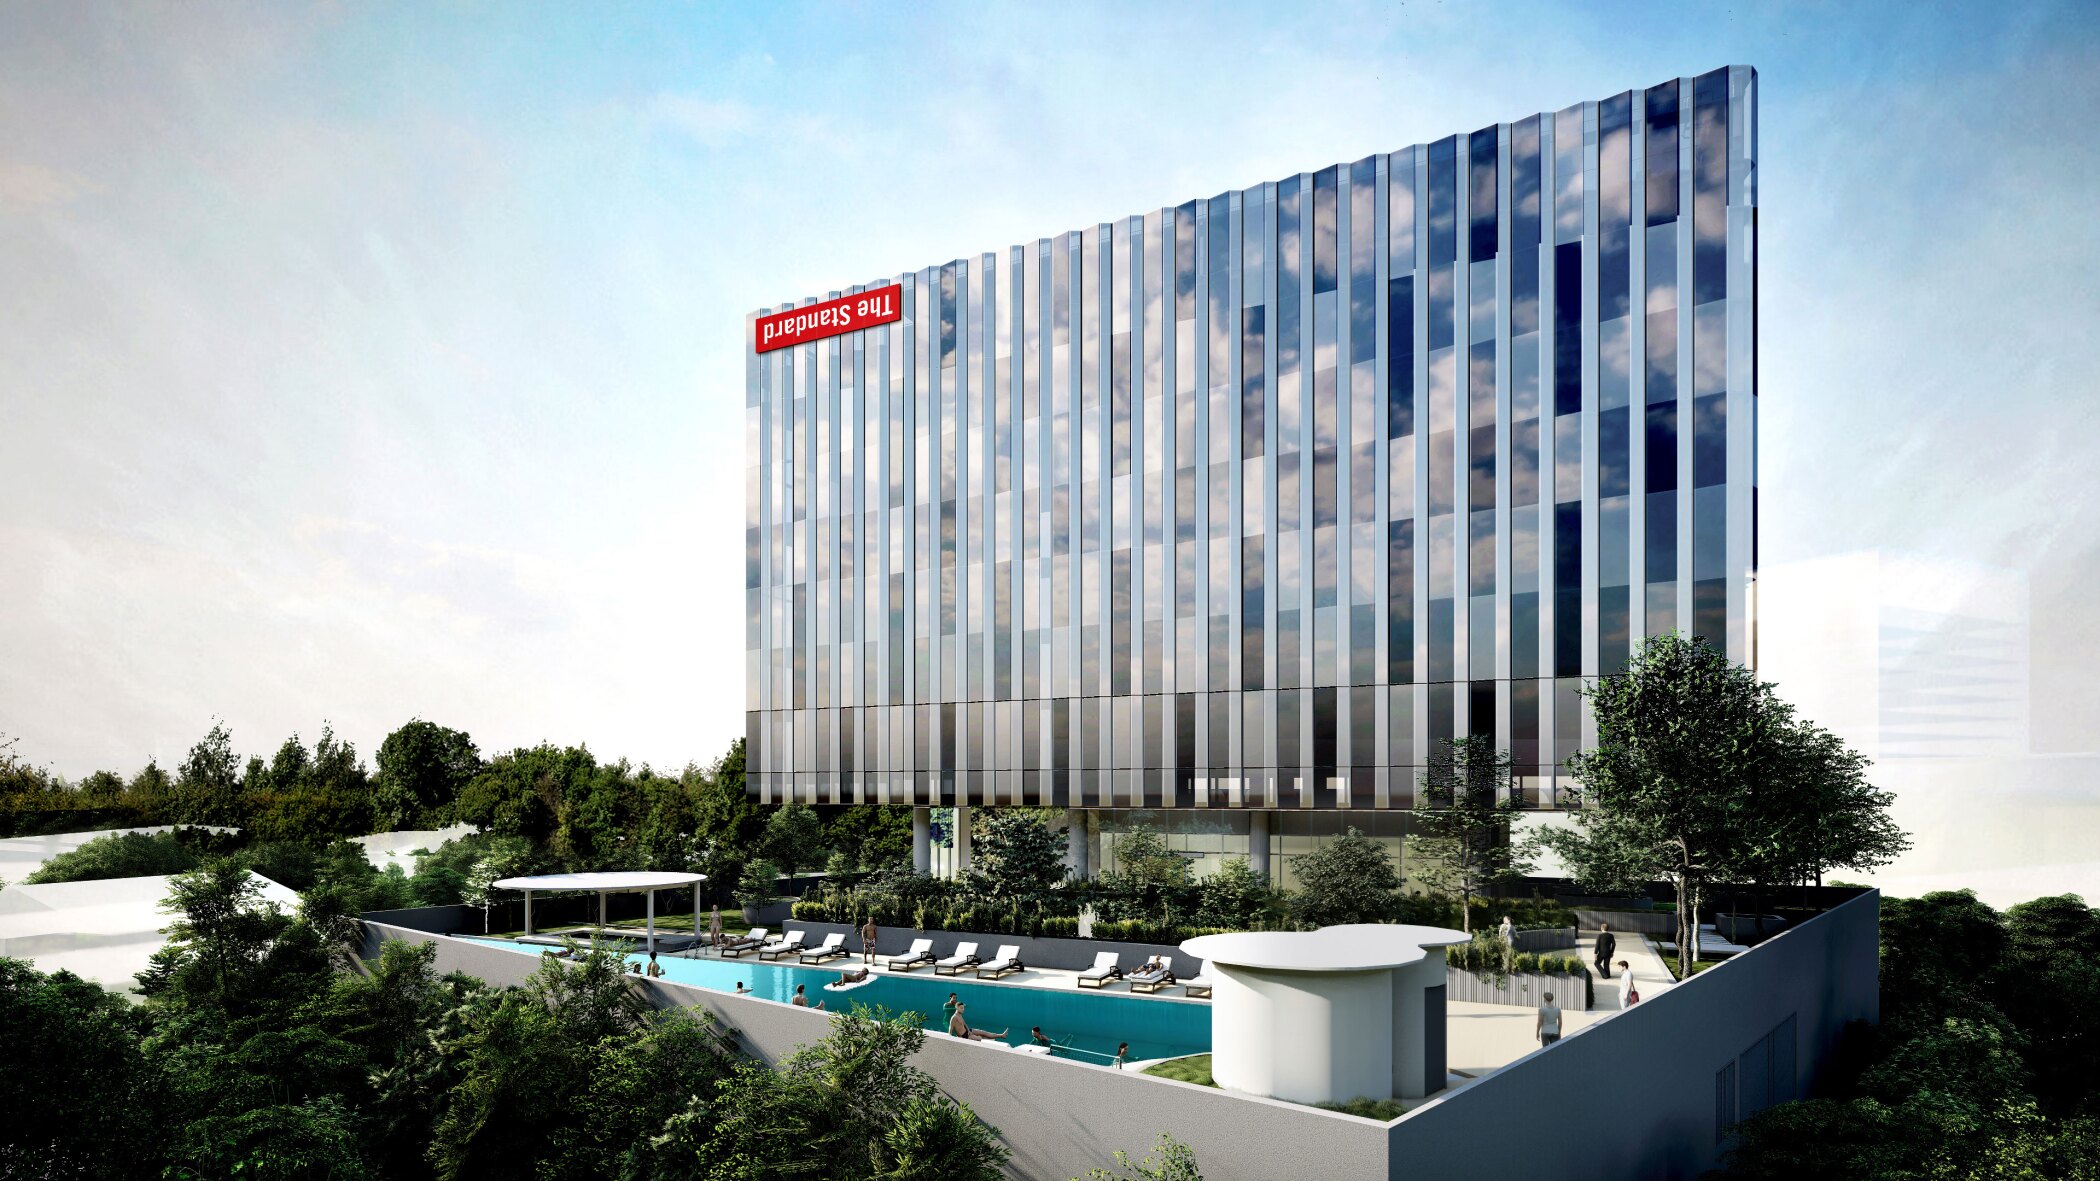 Standard International is entering a period of significant growth, with several new projects in various stages of development across the globe. The Standard, Singapore is one of four hotels the company plans to open this year. (Standard International)